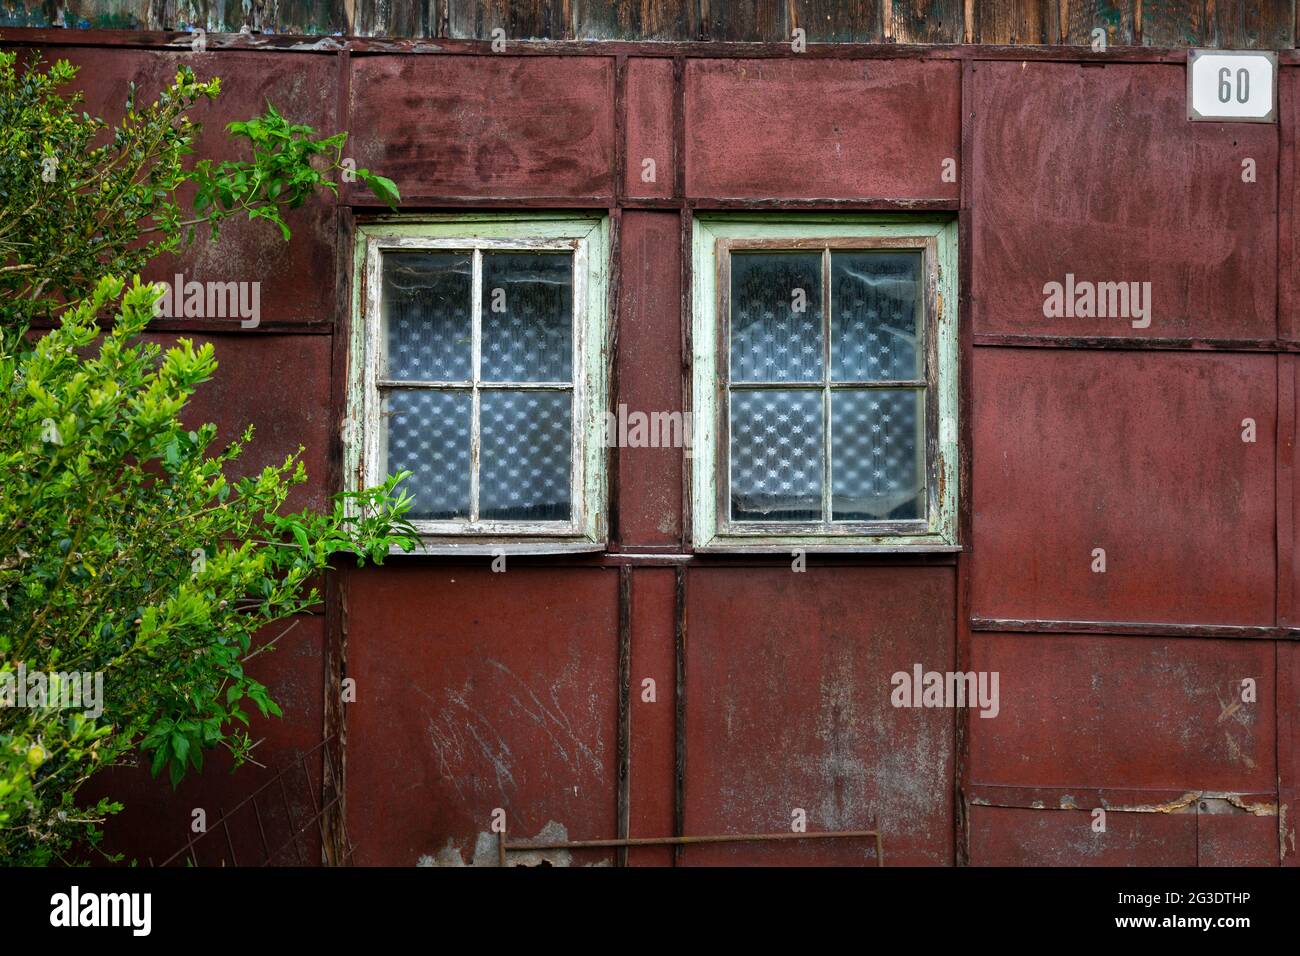 Old abandoned log cabin in Sutovo village, Slovakia. Stock Photo